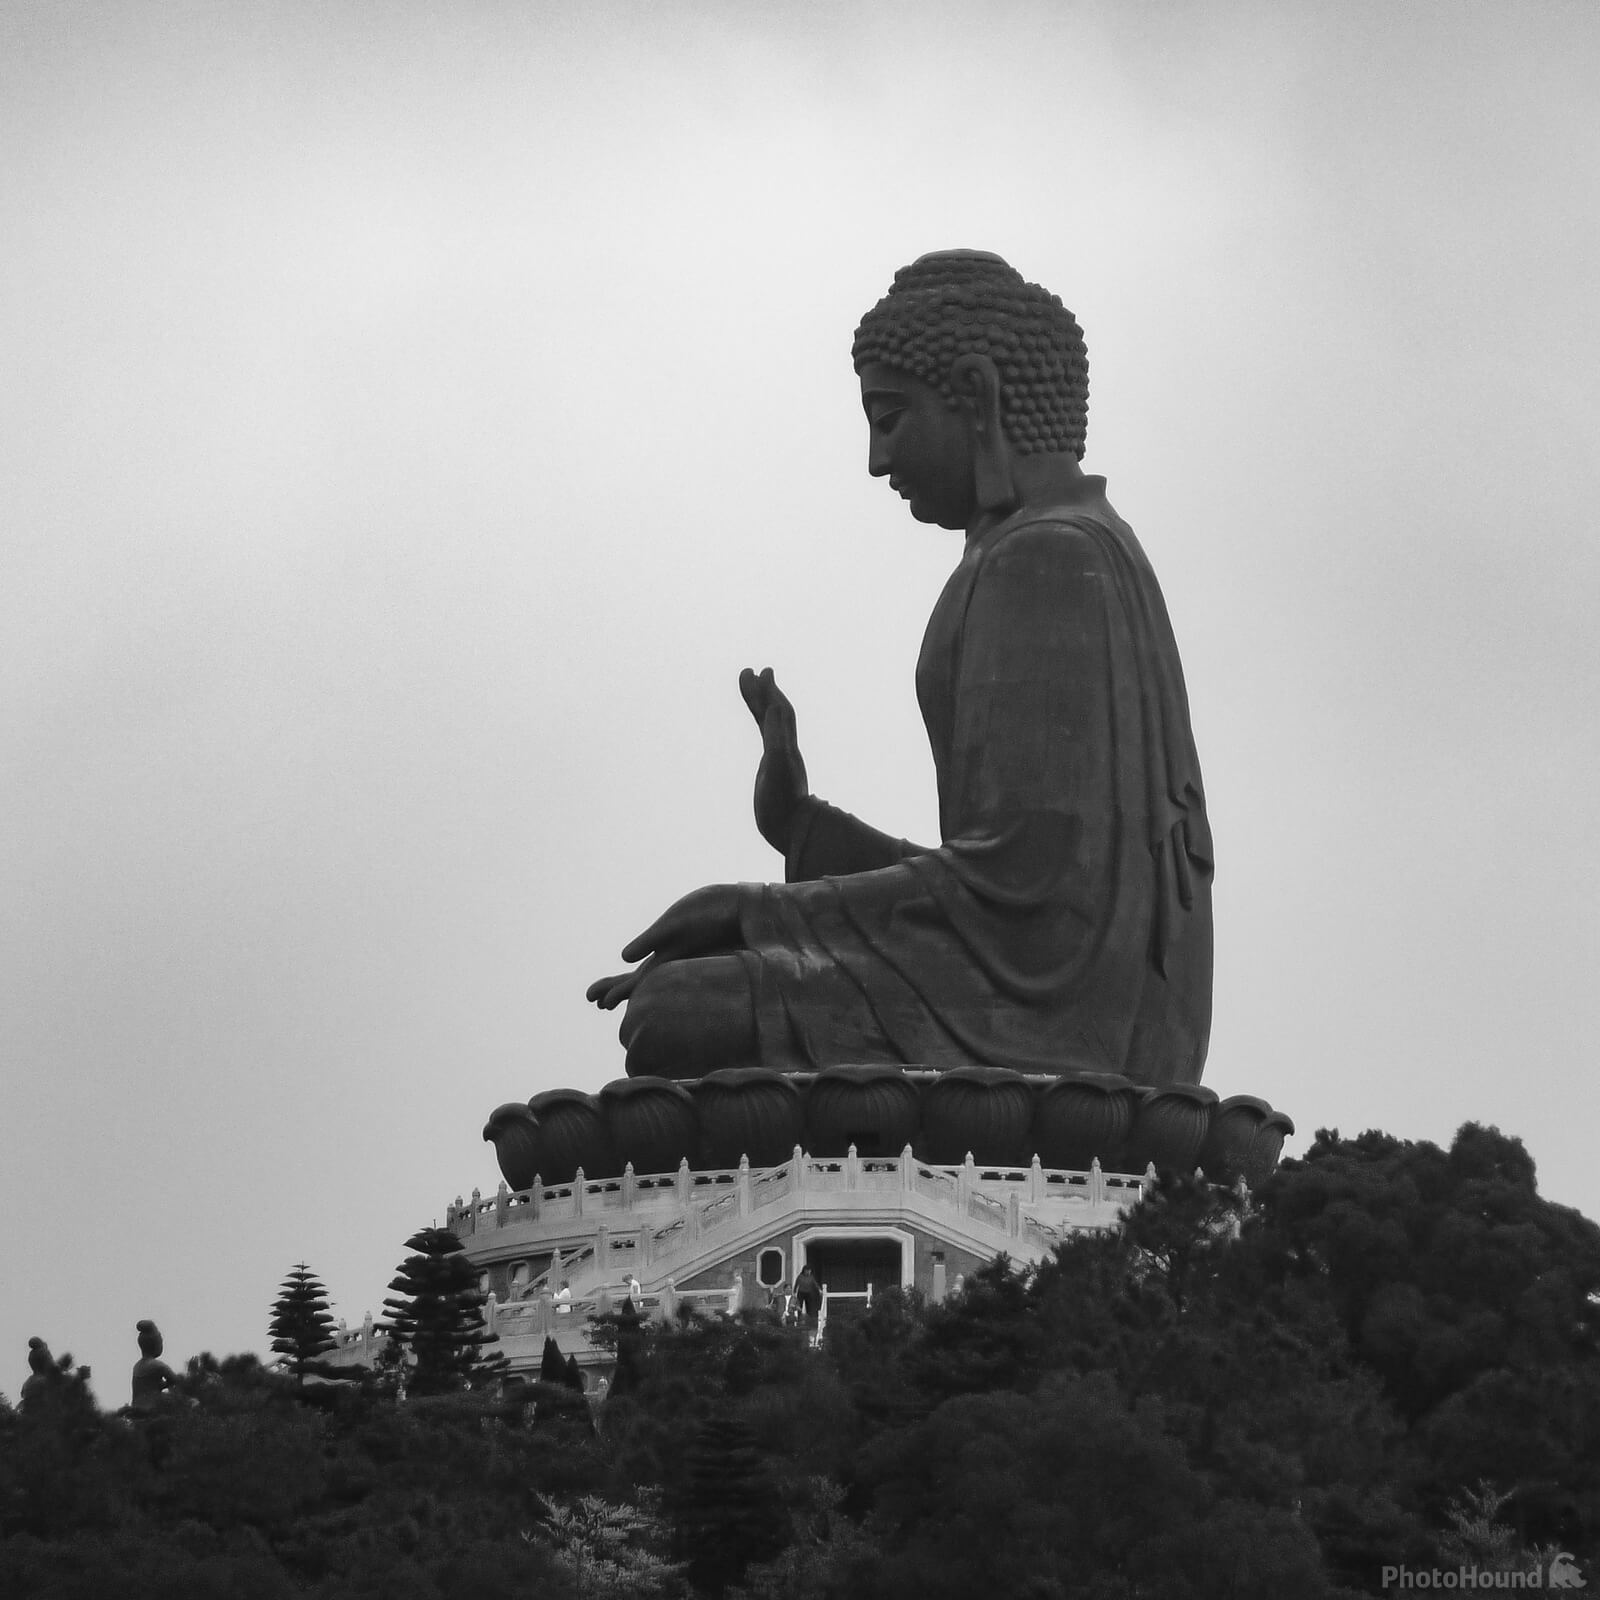 Image of Ngong Ping Village by Louise Browne